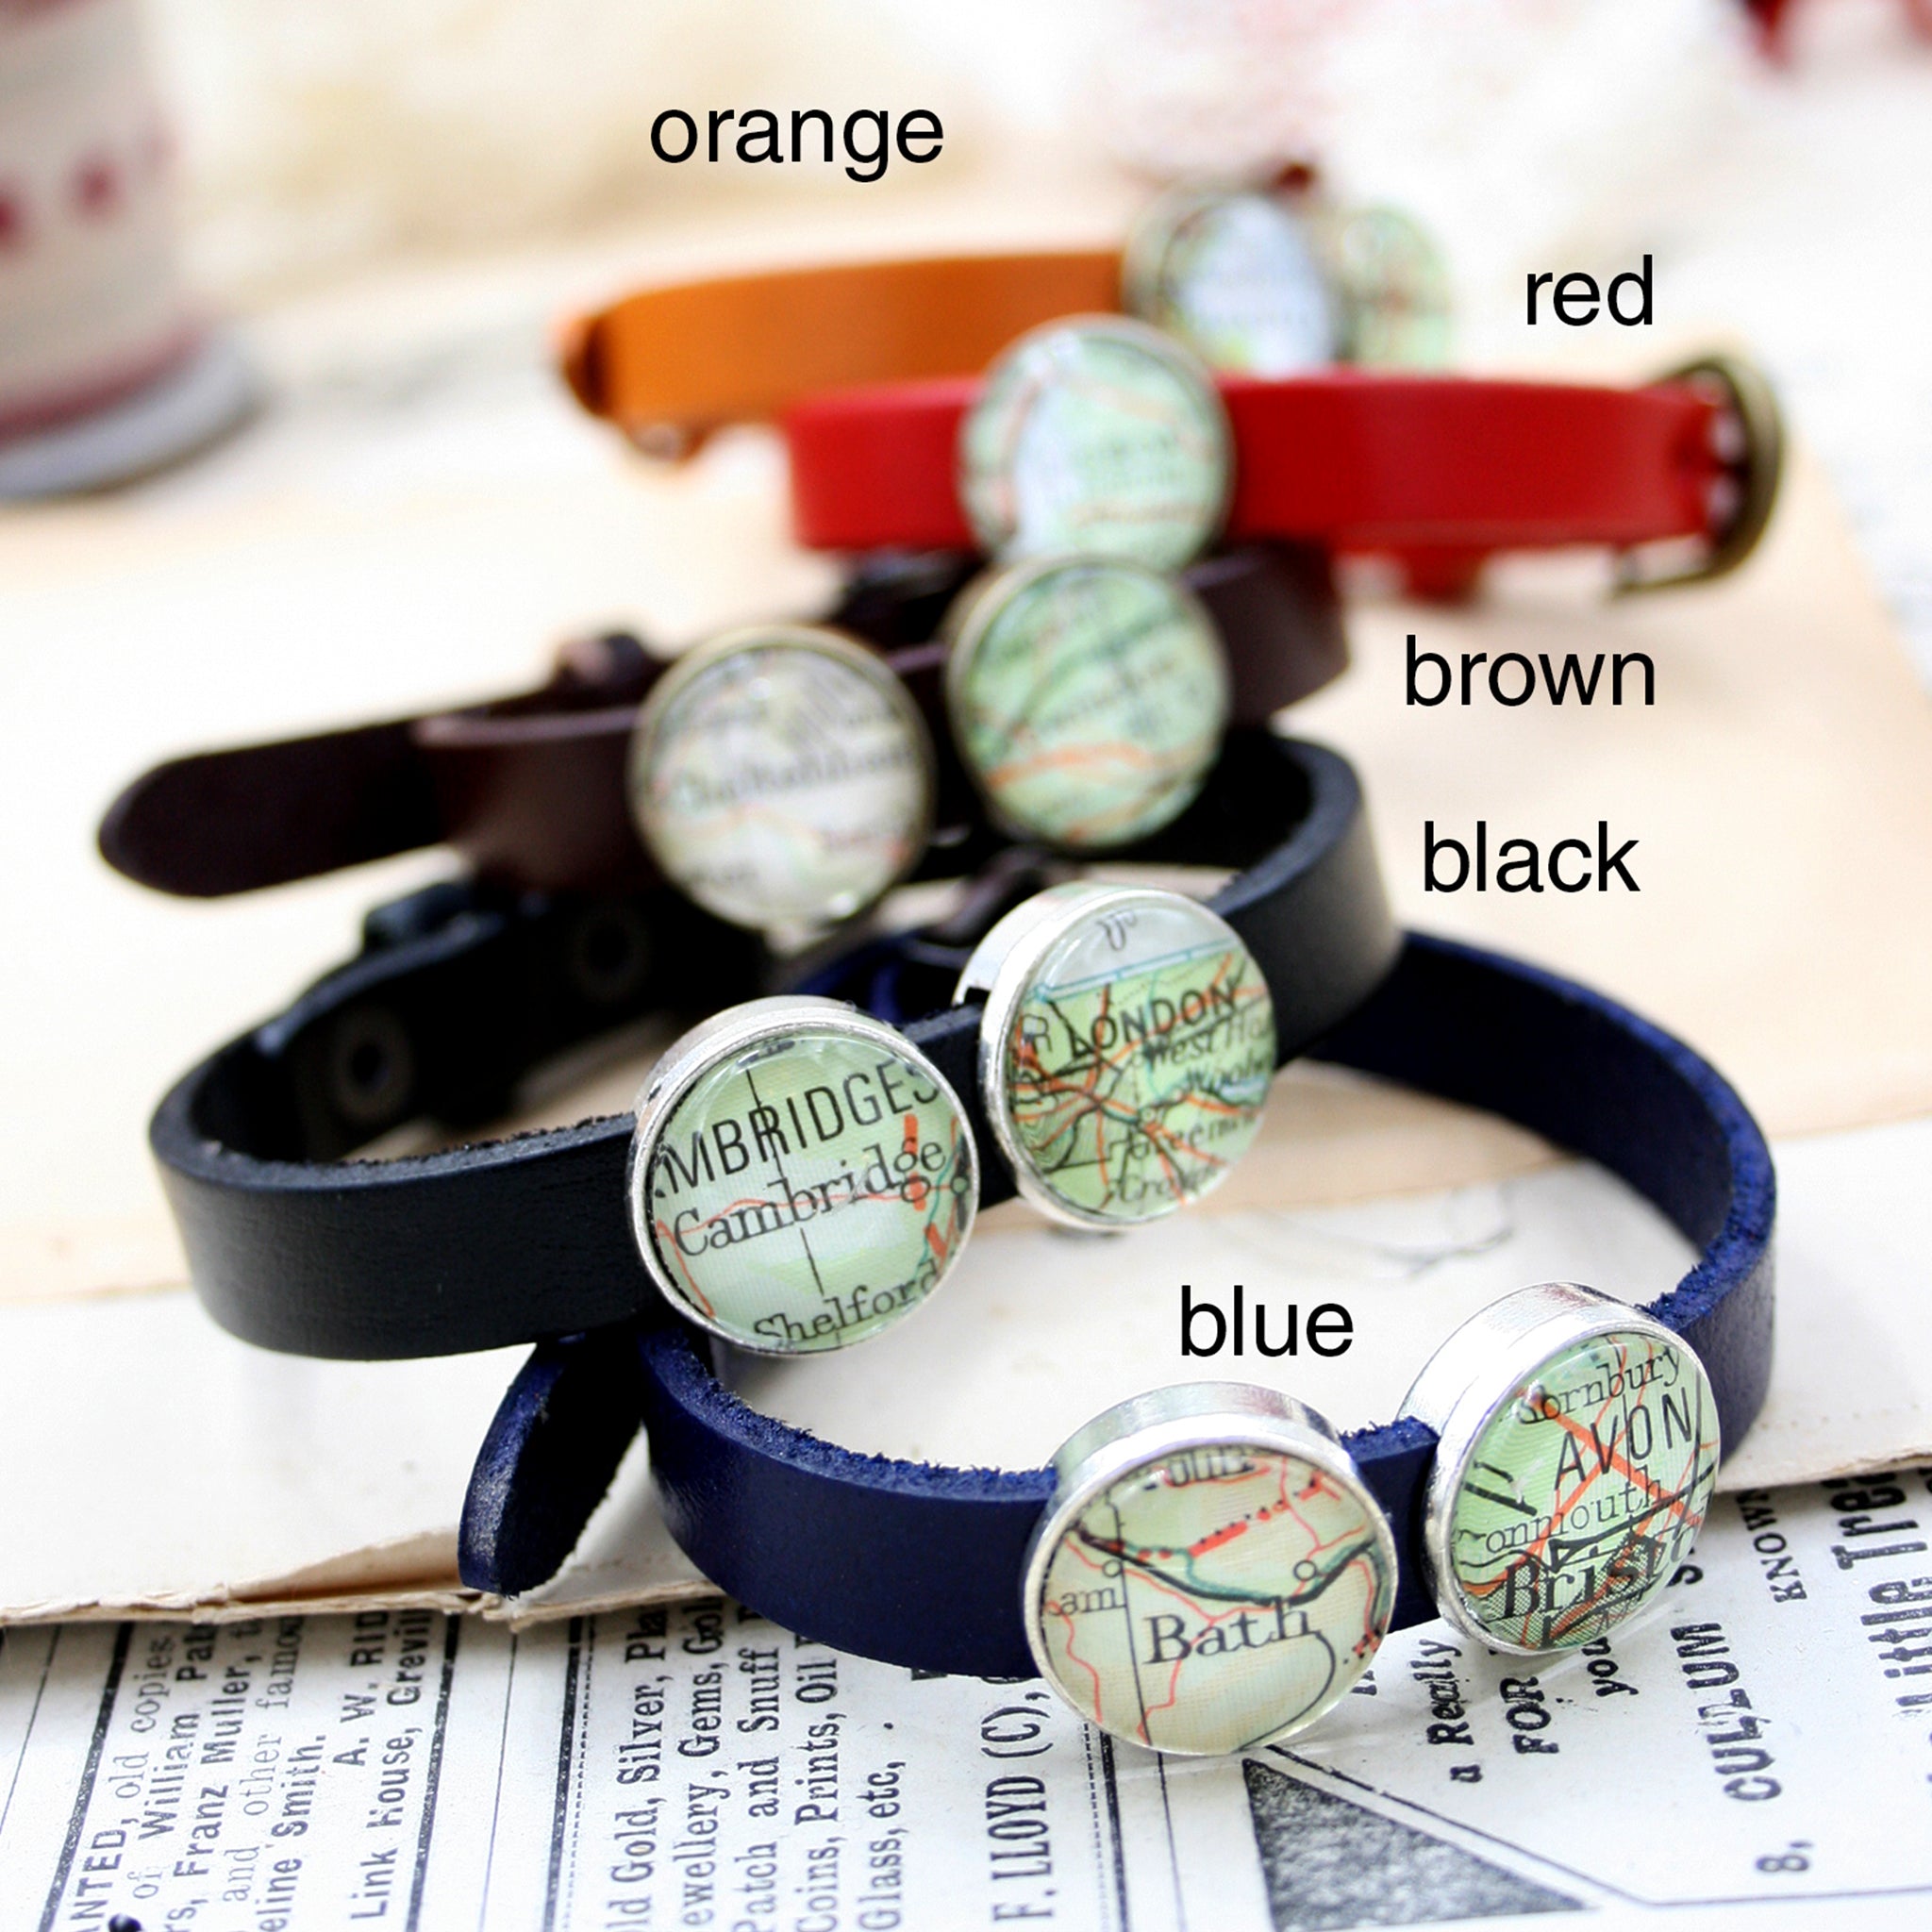 Blue, black, brown, red and orange leather bracelets featuring map locations